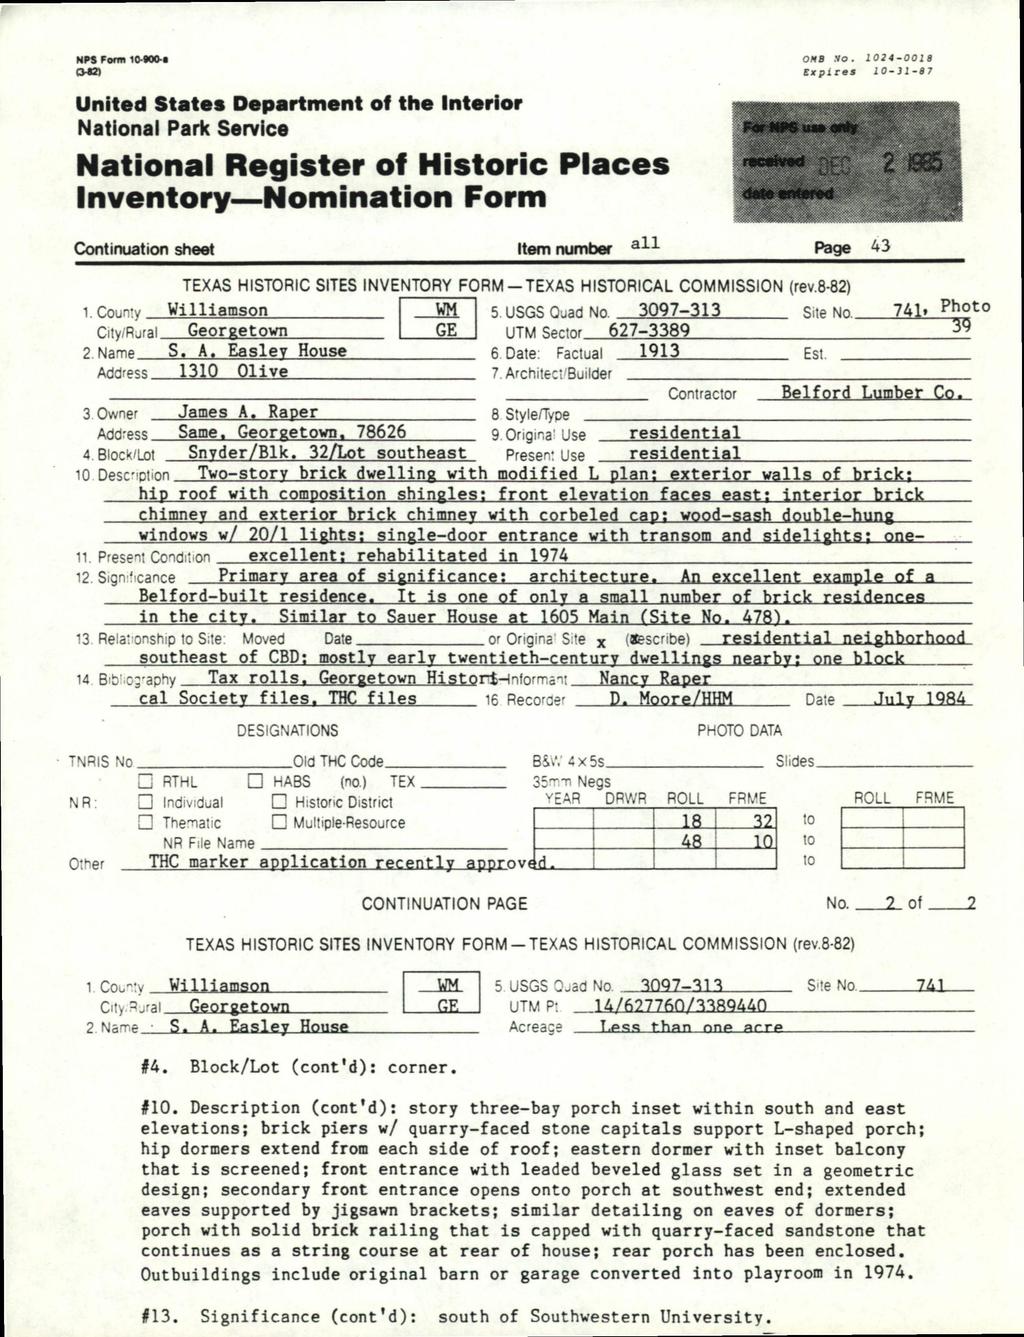 NPS Fonn 10-M0-«(M2) United States Department of the nterior National Park Service National Register off Historic Places nventory Nomination Form Continuation sheet tem numtjer all OMB NO.